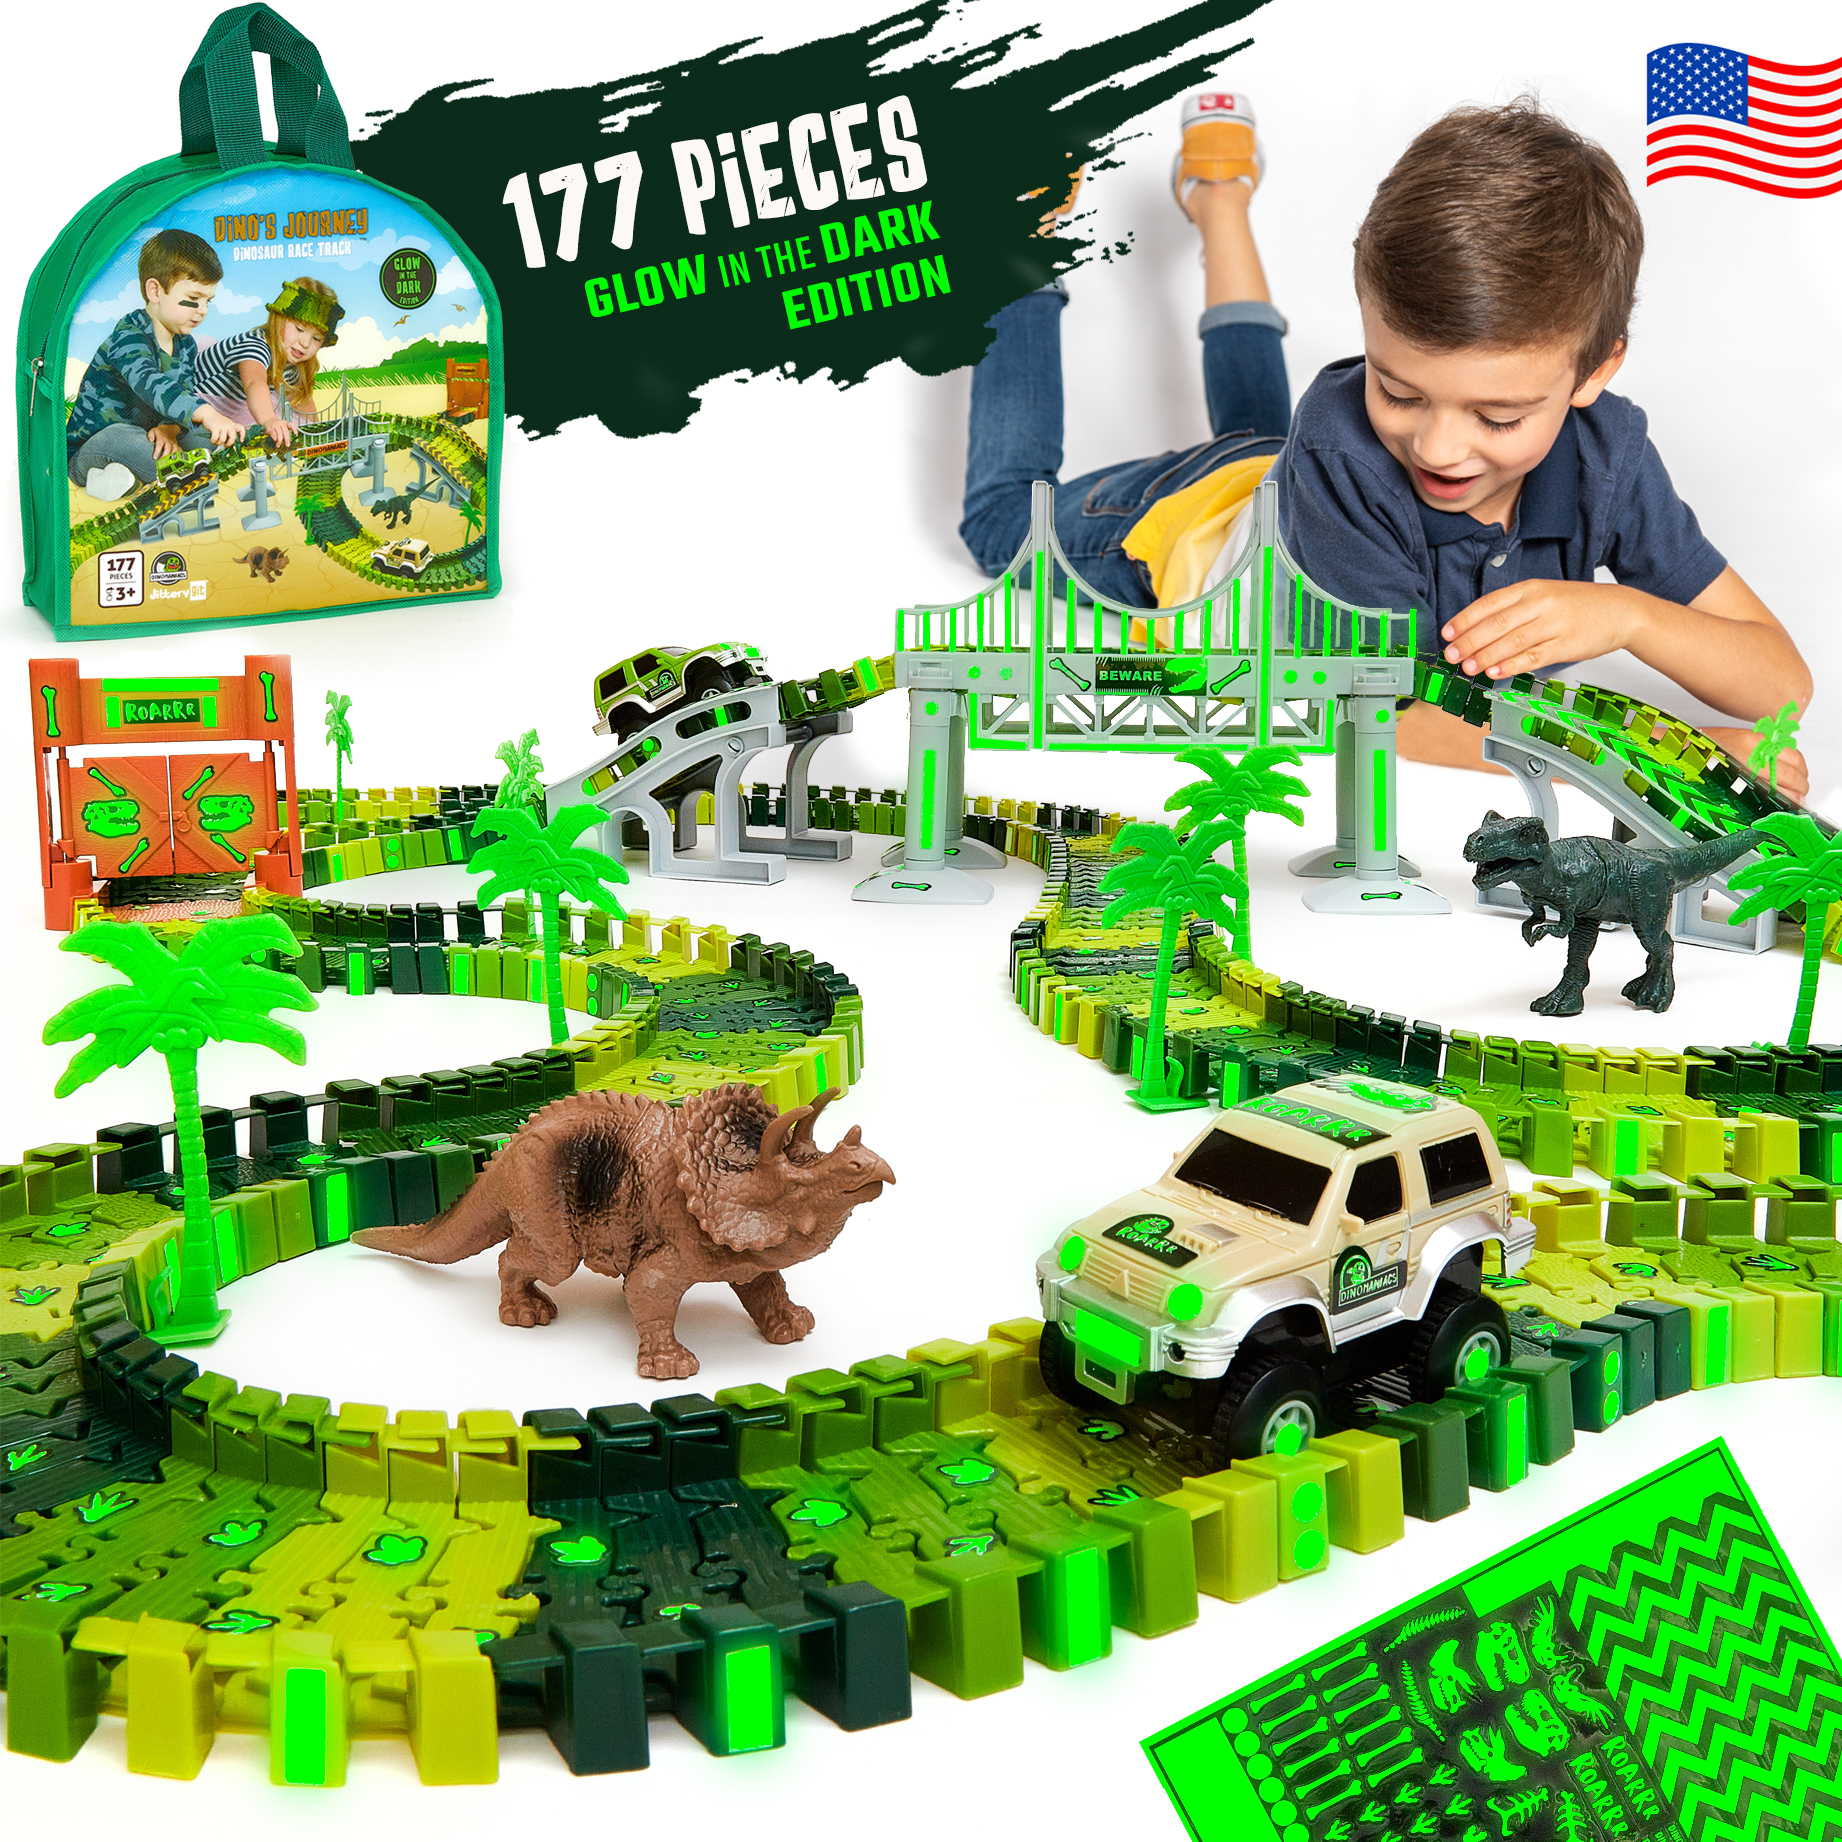 JitteryGit Dinosaur Toys Race Car Track STEM Set | Christmas Gifts For Boys Girls Kids Ages 3 4 5 6 7 8 Years Old - image 1 of 8